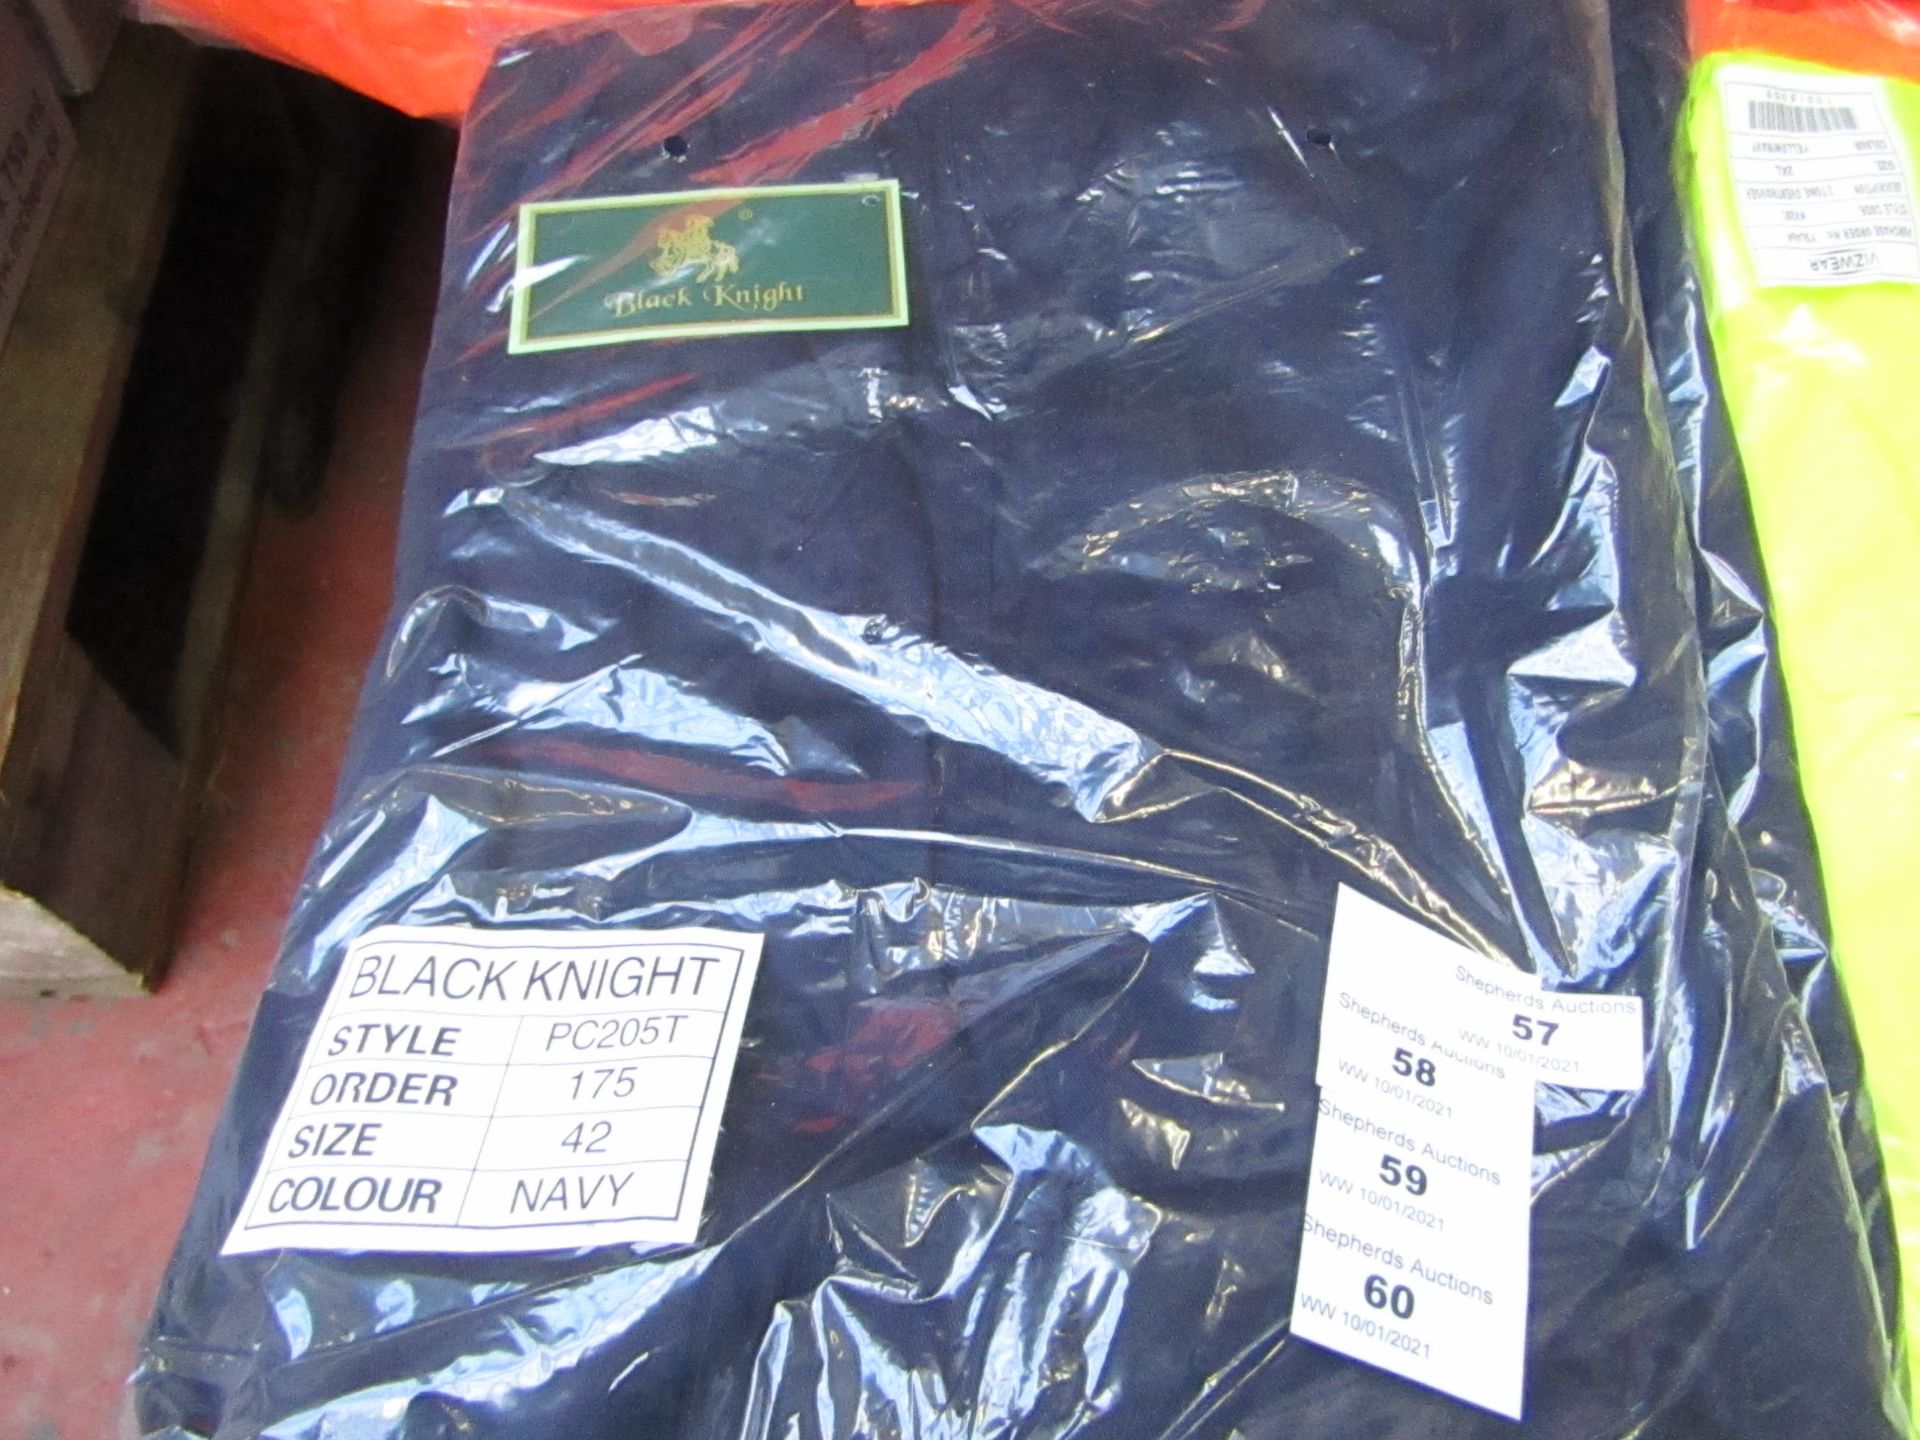 Black Knight - Navy Trousers - Size 42 - Unused & Packaged.